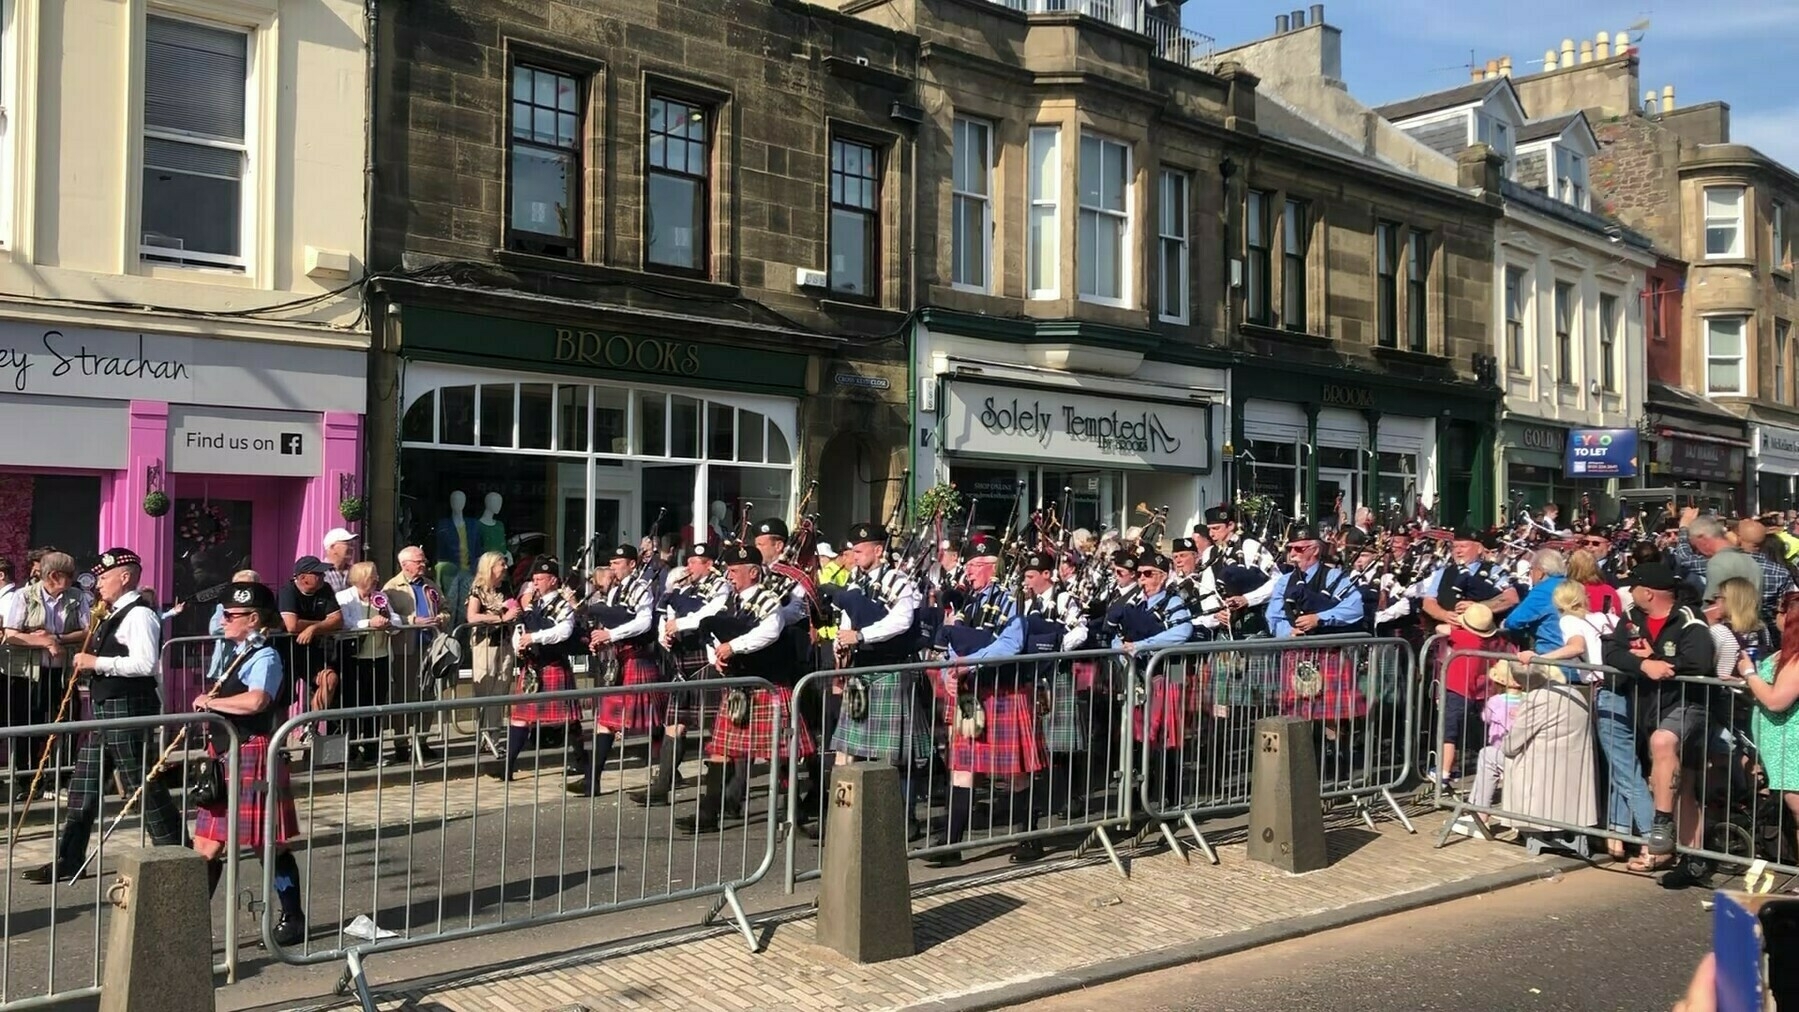 Bagpipe band marching along the street in Scotland. Lot's of lovely kilts!